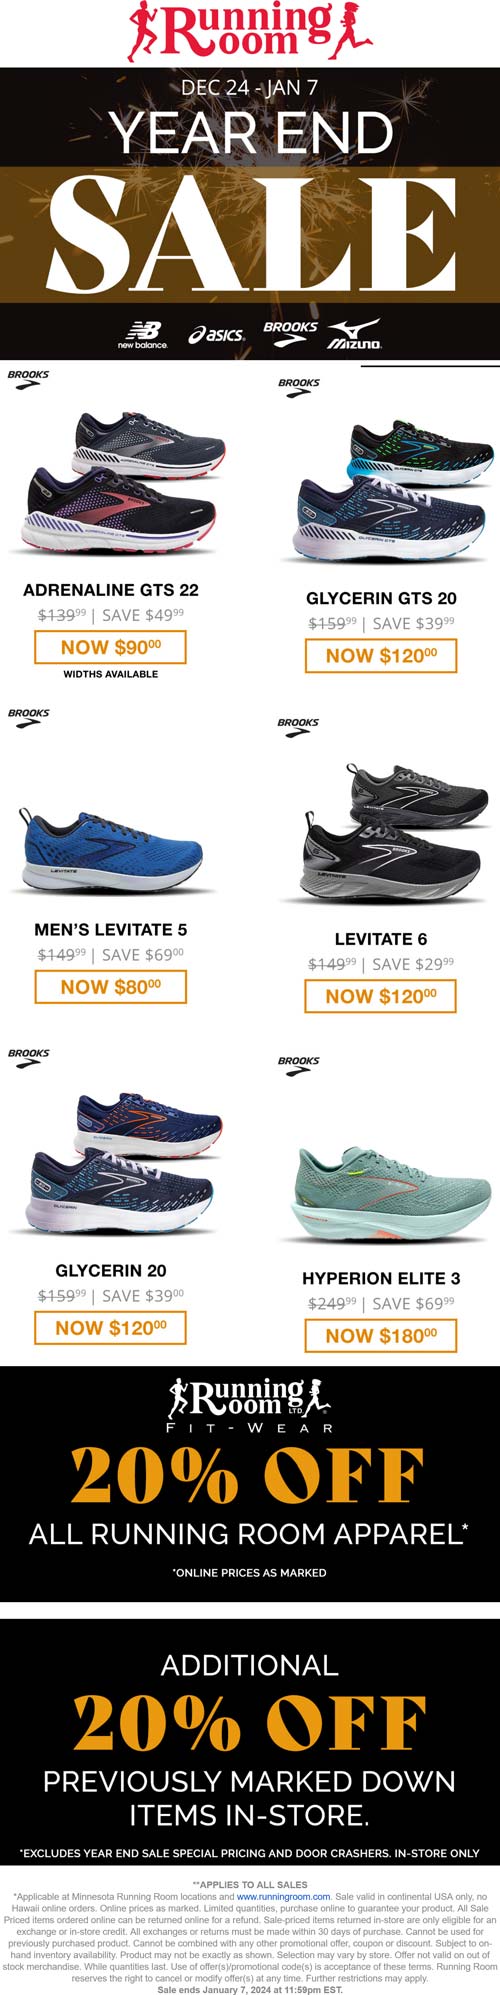 Running Room stores Coupon  20% off apparel & sale shoes at Running Room, ditto online #runningroom 